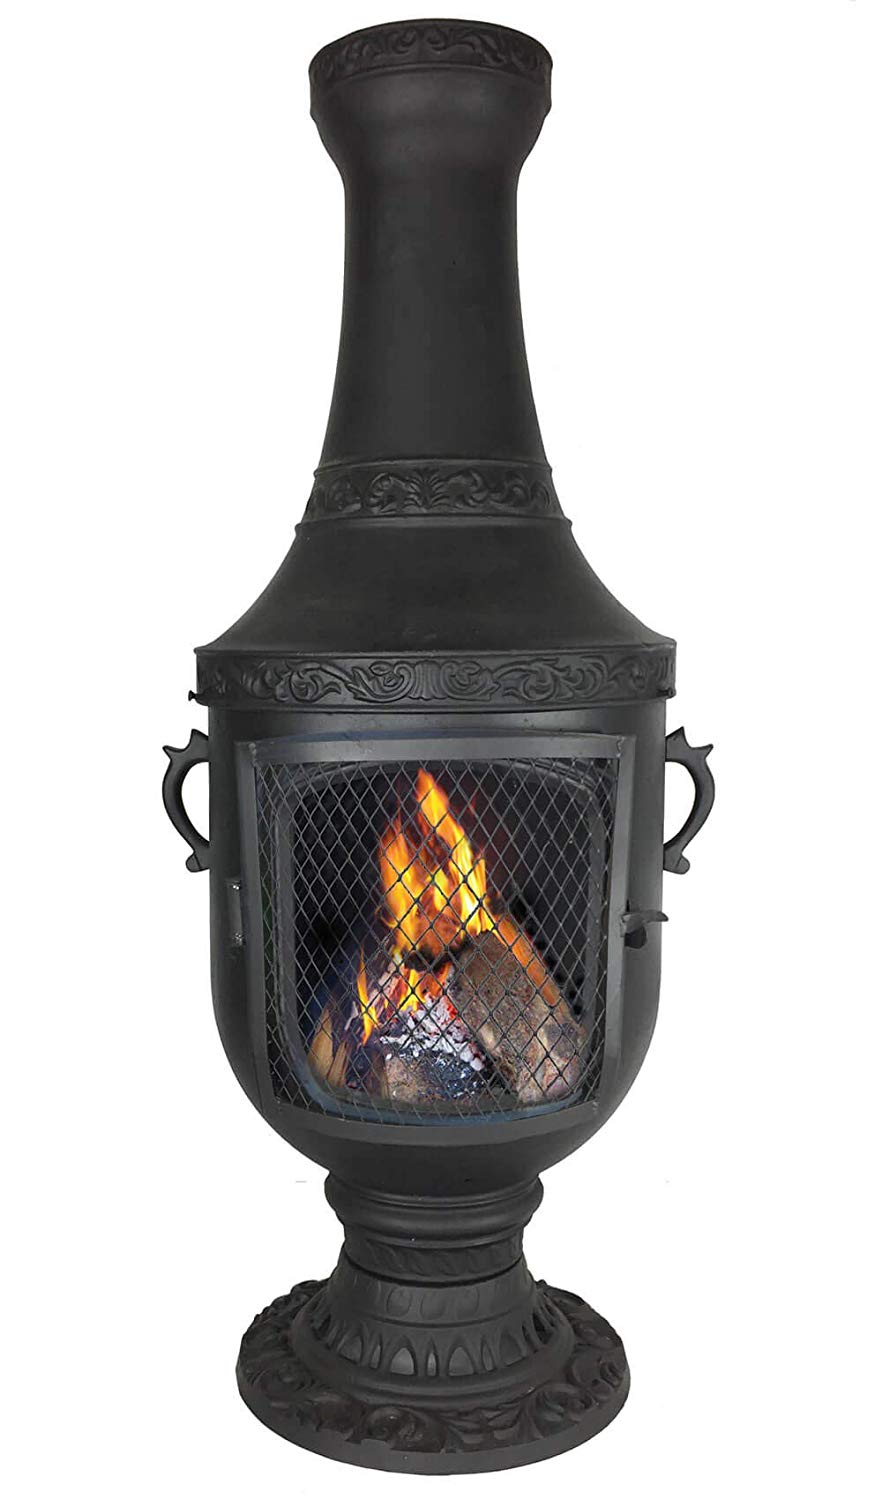 Chiminea Clay Outdoor Fireplace Luxury the Venetian Grill & Oven Chiminea In Charcoal Cast Aluminum